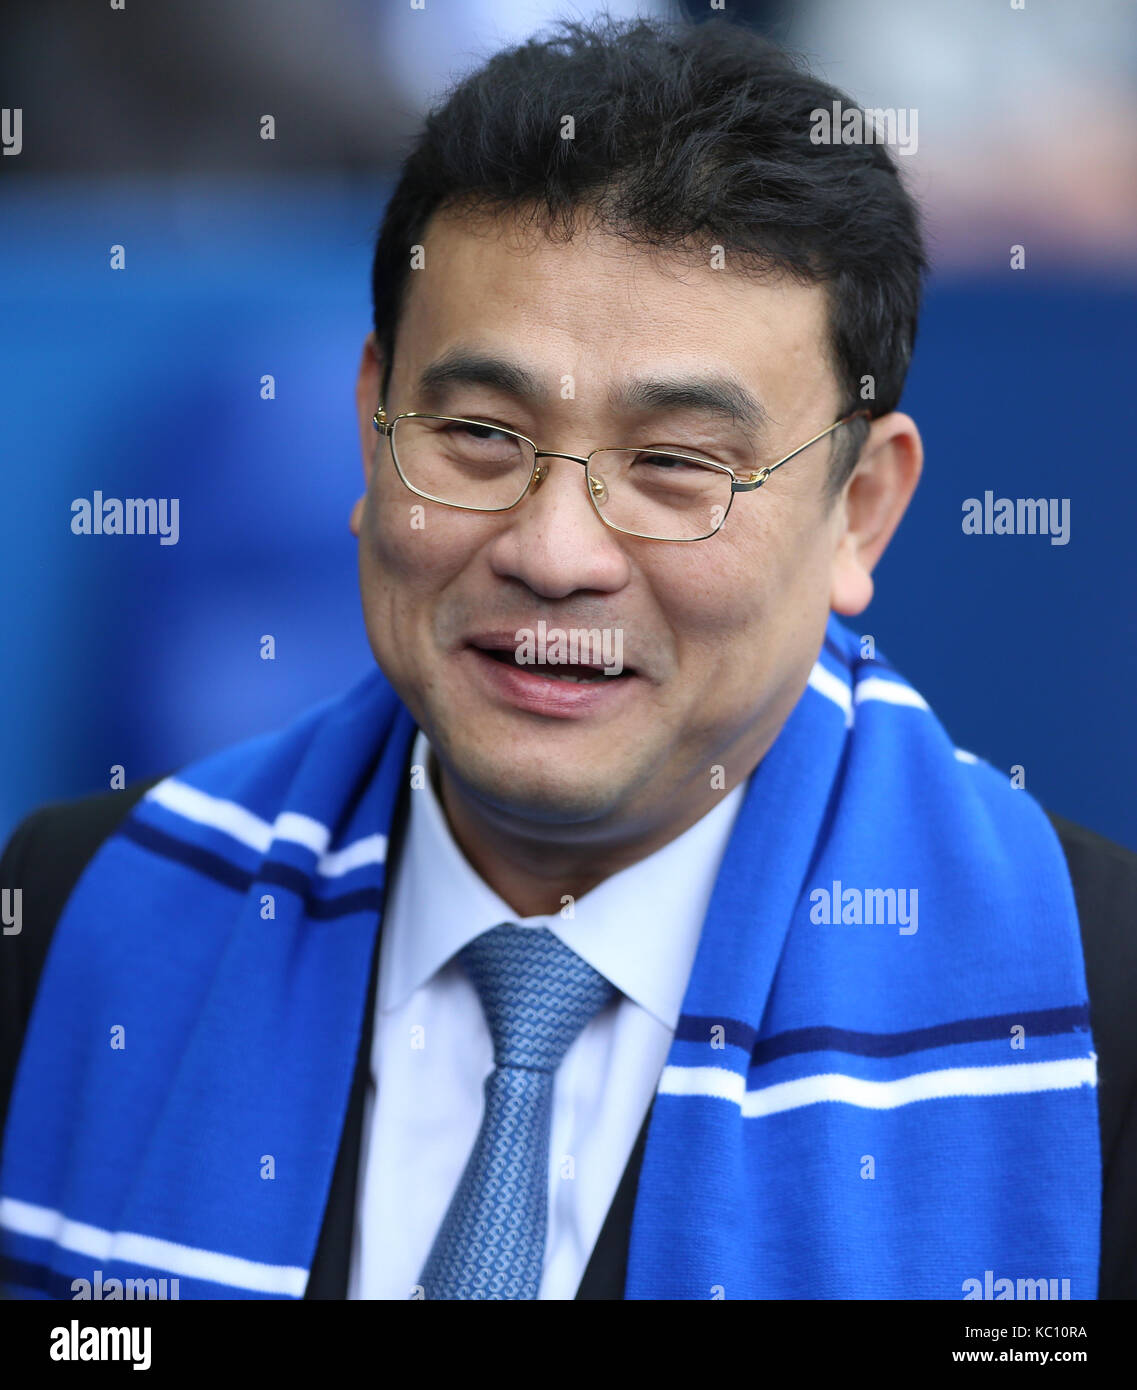 Sheffield Wednesday owner Dejphon Chansiri during the Sky Bet Championship match at Hillsborough, Sheffield. PRESS ASSOCIATION Photo. Picture date: Sunday October 1, 2017. See PA story SOCCER Sheff Wed. Photo credit should read: Nigel French/PA Wire. RESTRICTIONS: No use with unauthorised audio, video, data, fixture lists, club/league logos or 'live' services. Online in-match use limited to 75 images, no video emulation. No use in betting, games or single club/league/player publications. Stock Photo